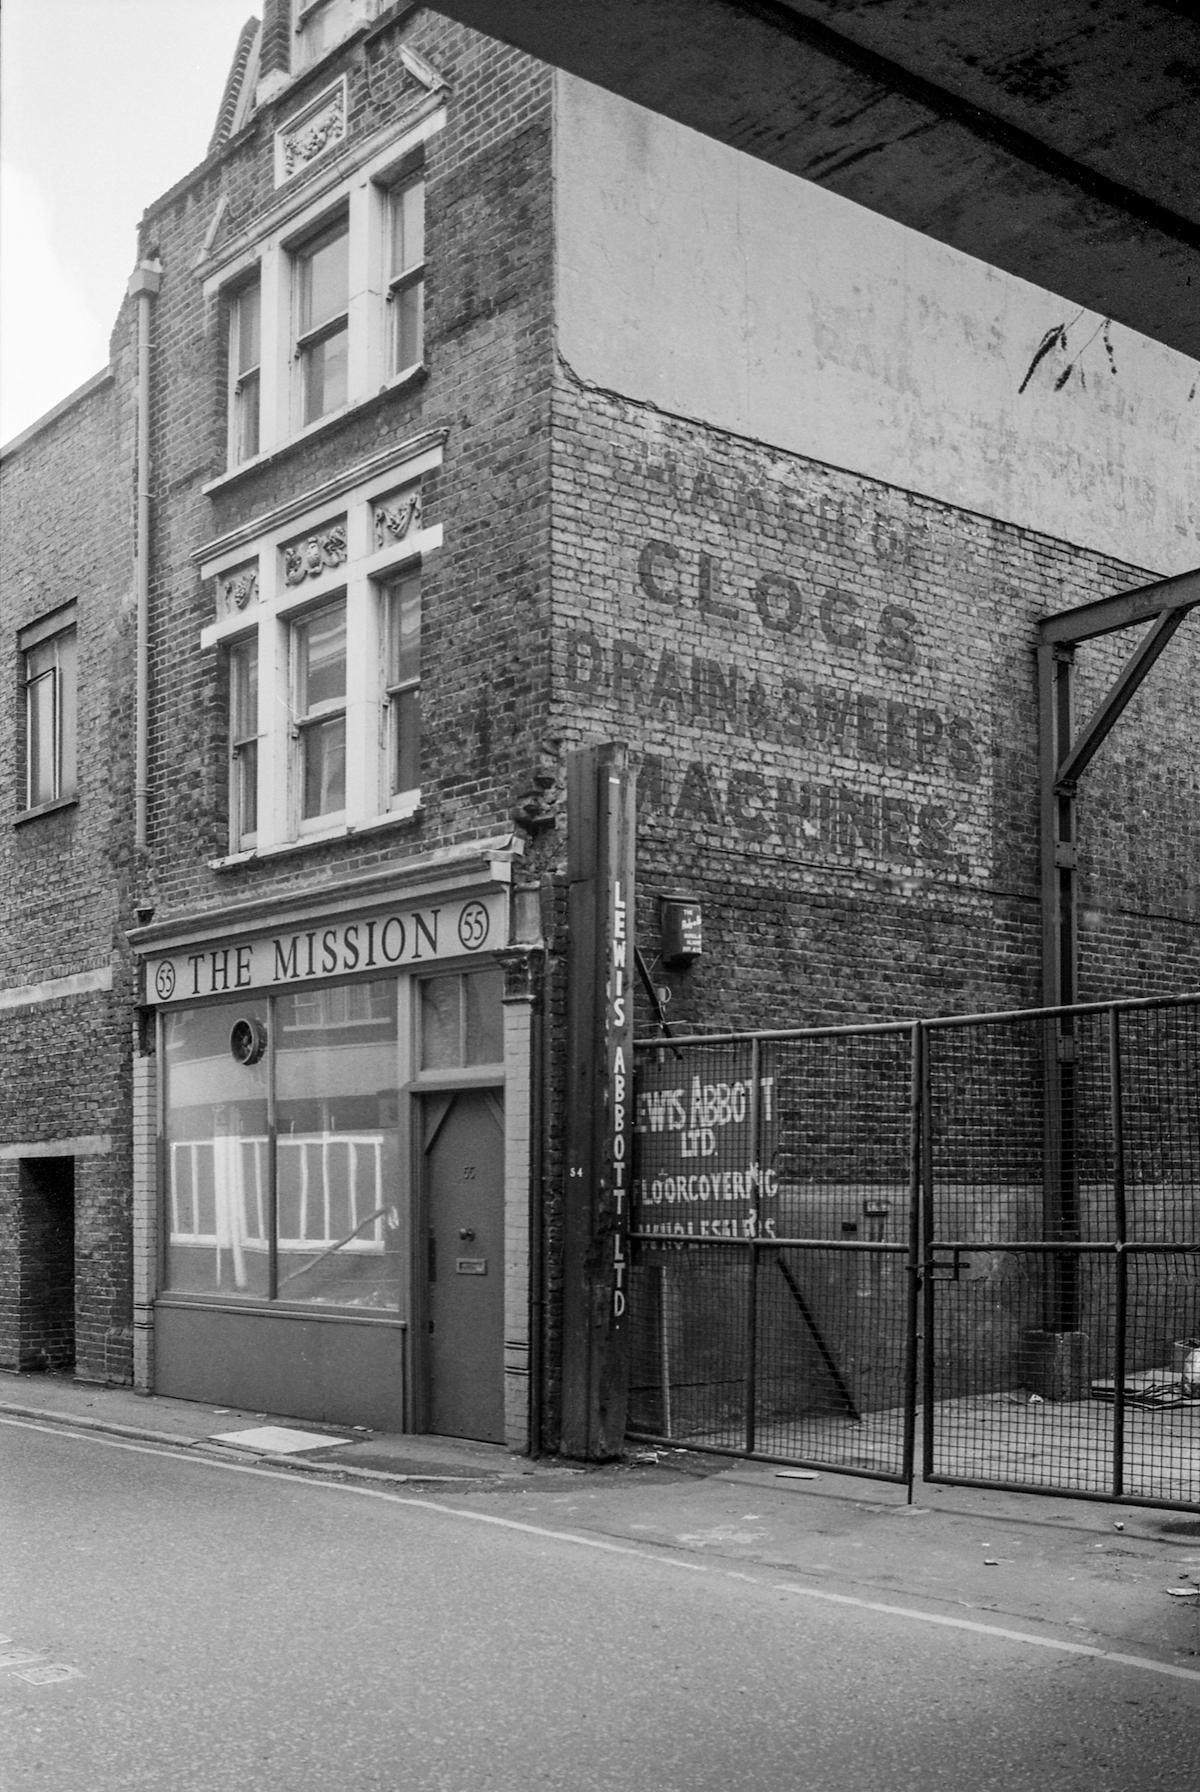 The Mission, Holywell Lane, Shoreditch, Hackney 86